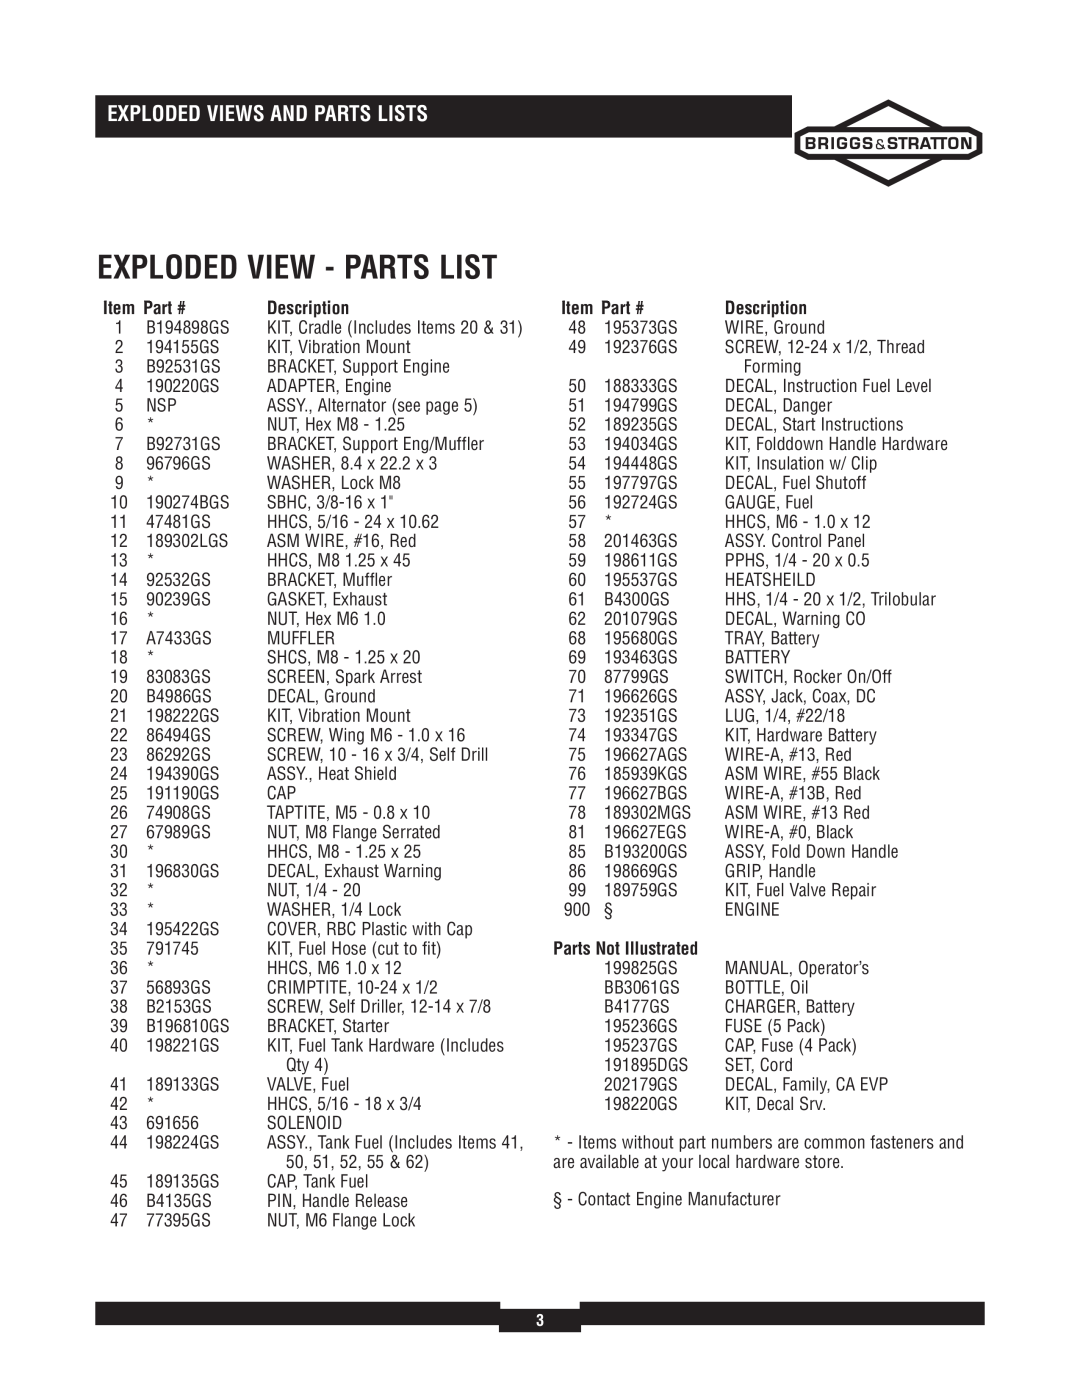 Briggs & Stratton 030244-02 manual Exploded View - Parts List, Item Part #, Description, Parts Not Illustrated 